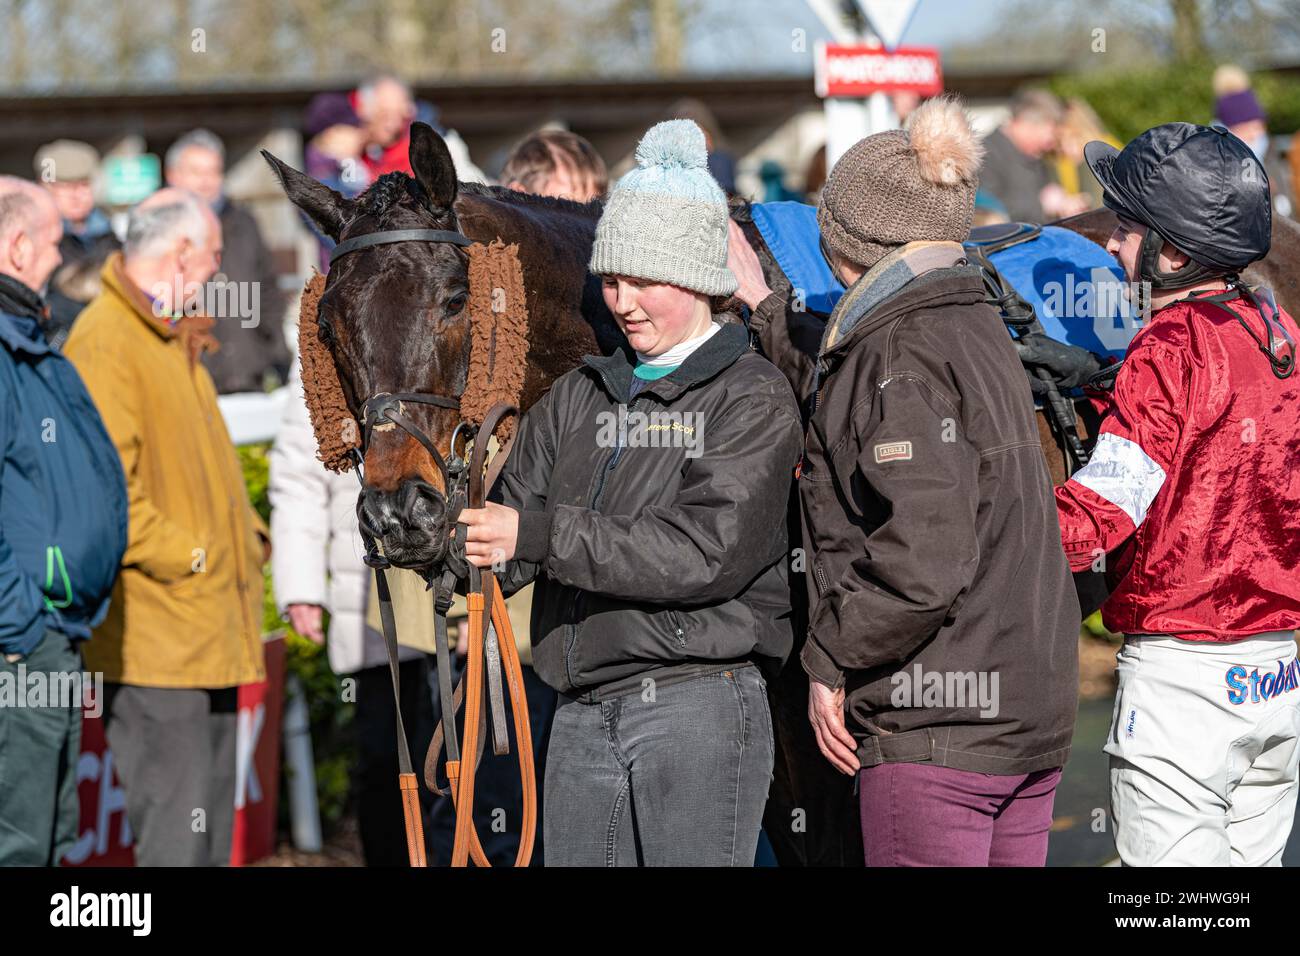 Second race at Wincanton, Saturday February 19th 2022, Steeple Chase Stock Photo